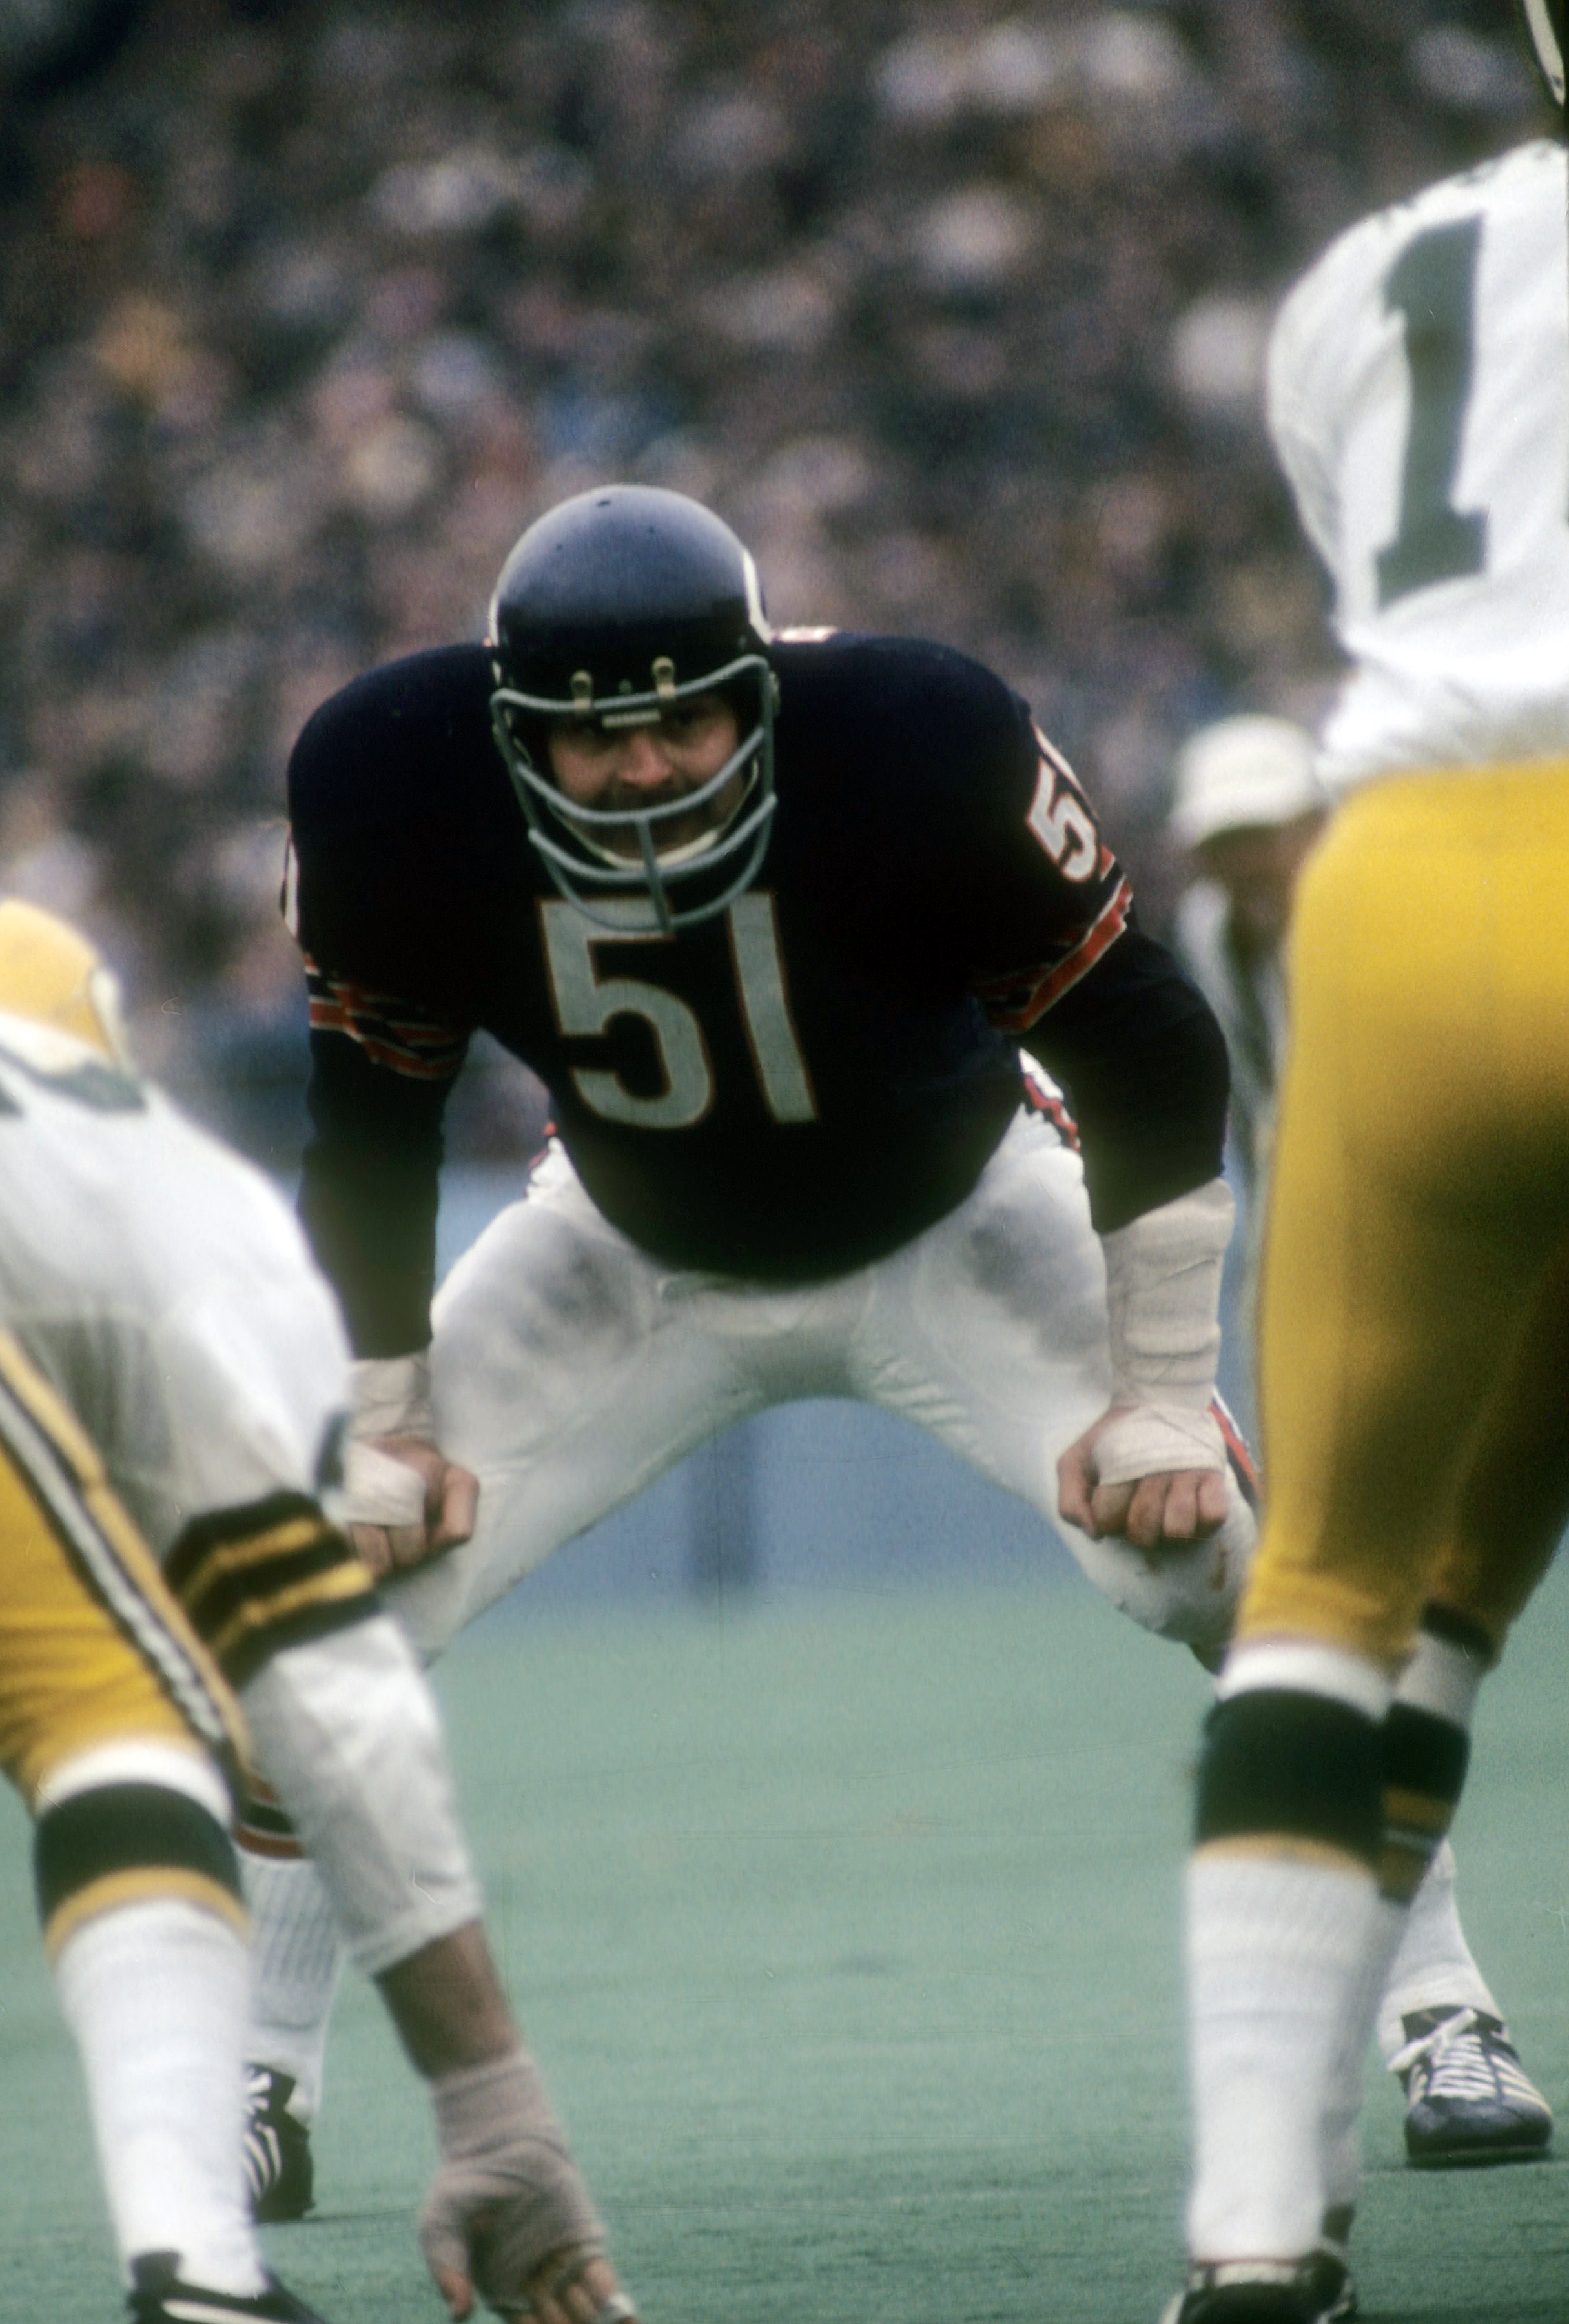 Dick Butkus during an NFL football game at Soldier Field on January 1, 1971 in Chicago, Illinois. | Sources: Getty Images